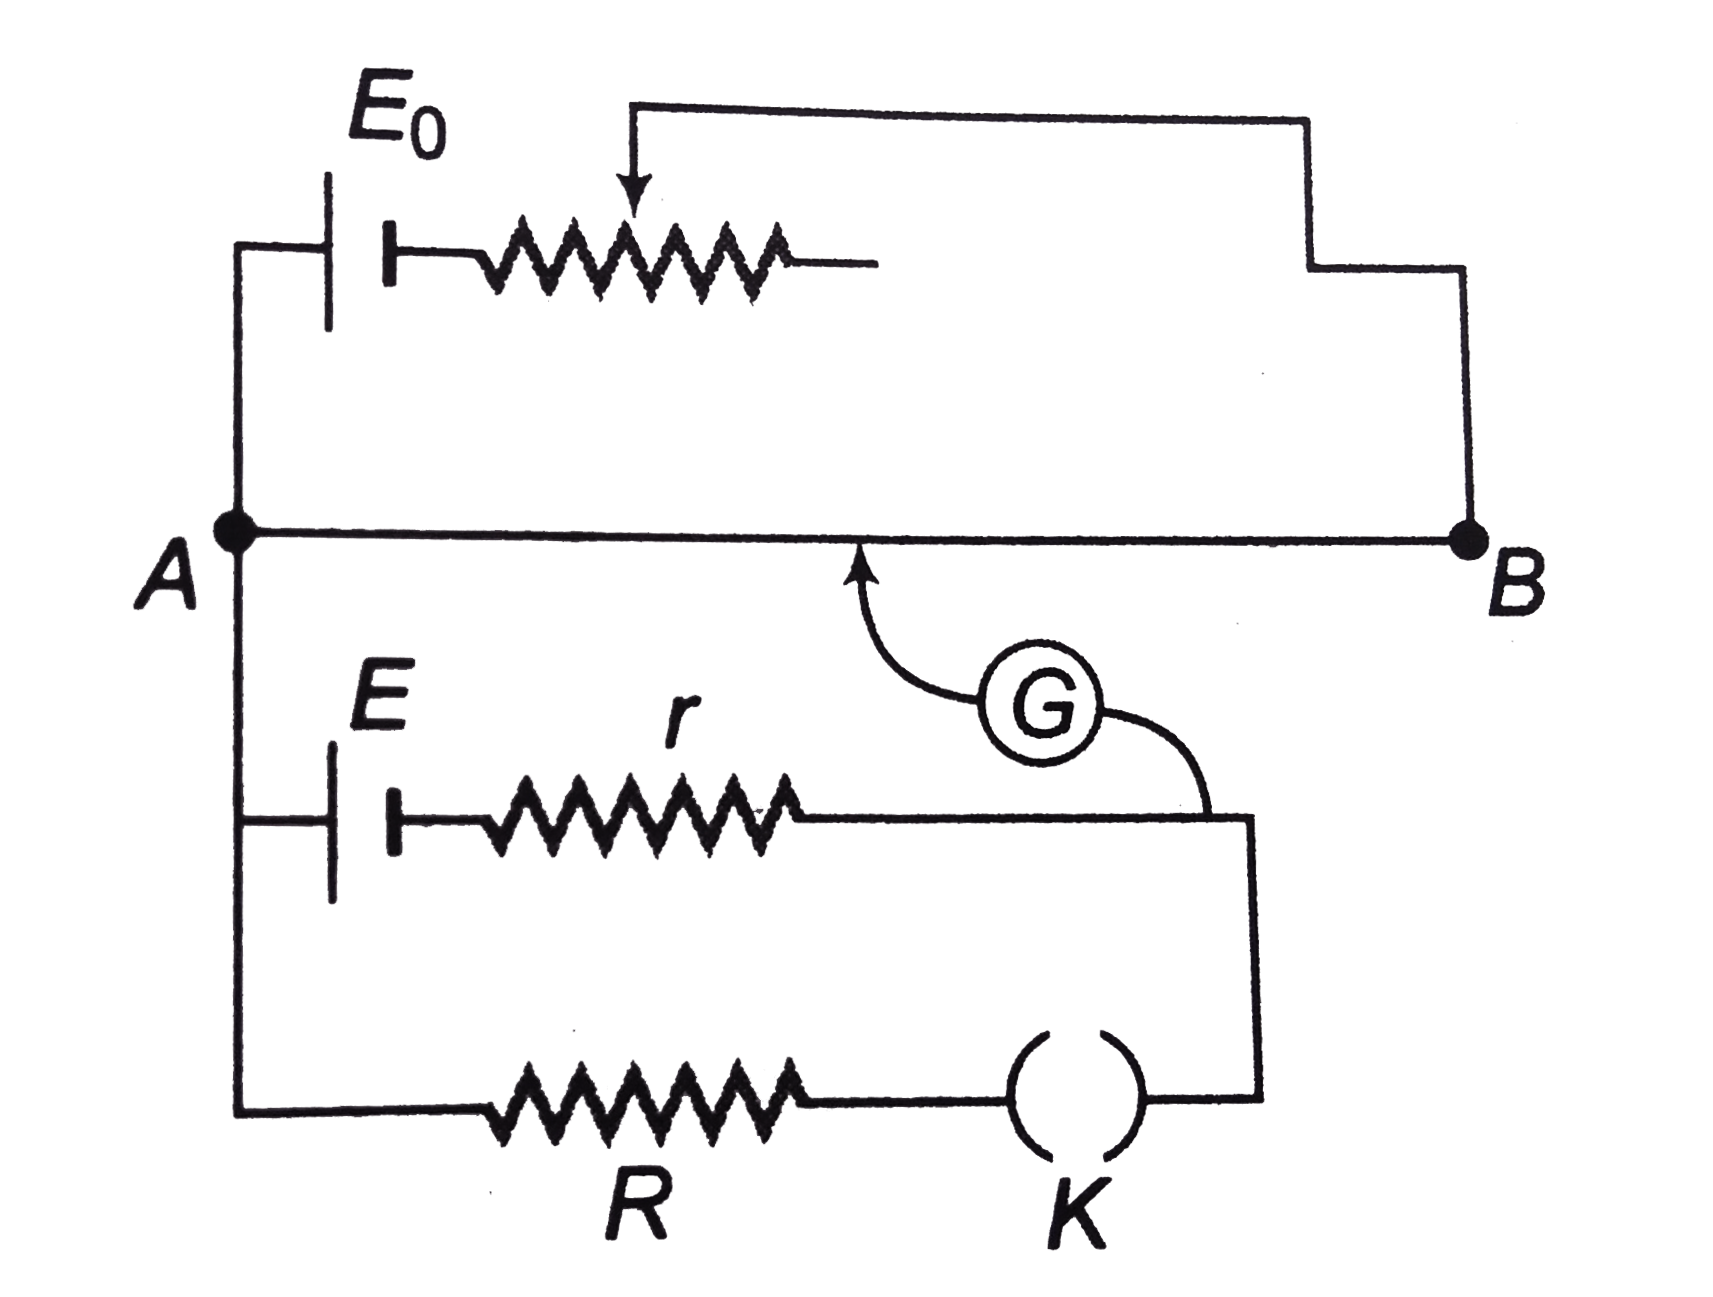 The given figure represents an arrangement of potentiometer for the calculation of internal resistance (r) of the unknown battery (E). The balance length is 70.0 cm with the key opened and 60.0 cm with the key closed. R is 132.40Omega. The internal resistance (r) of the uknown cell will be